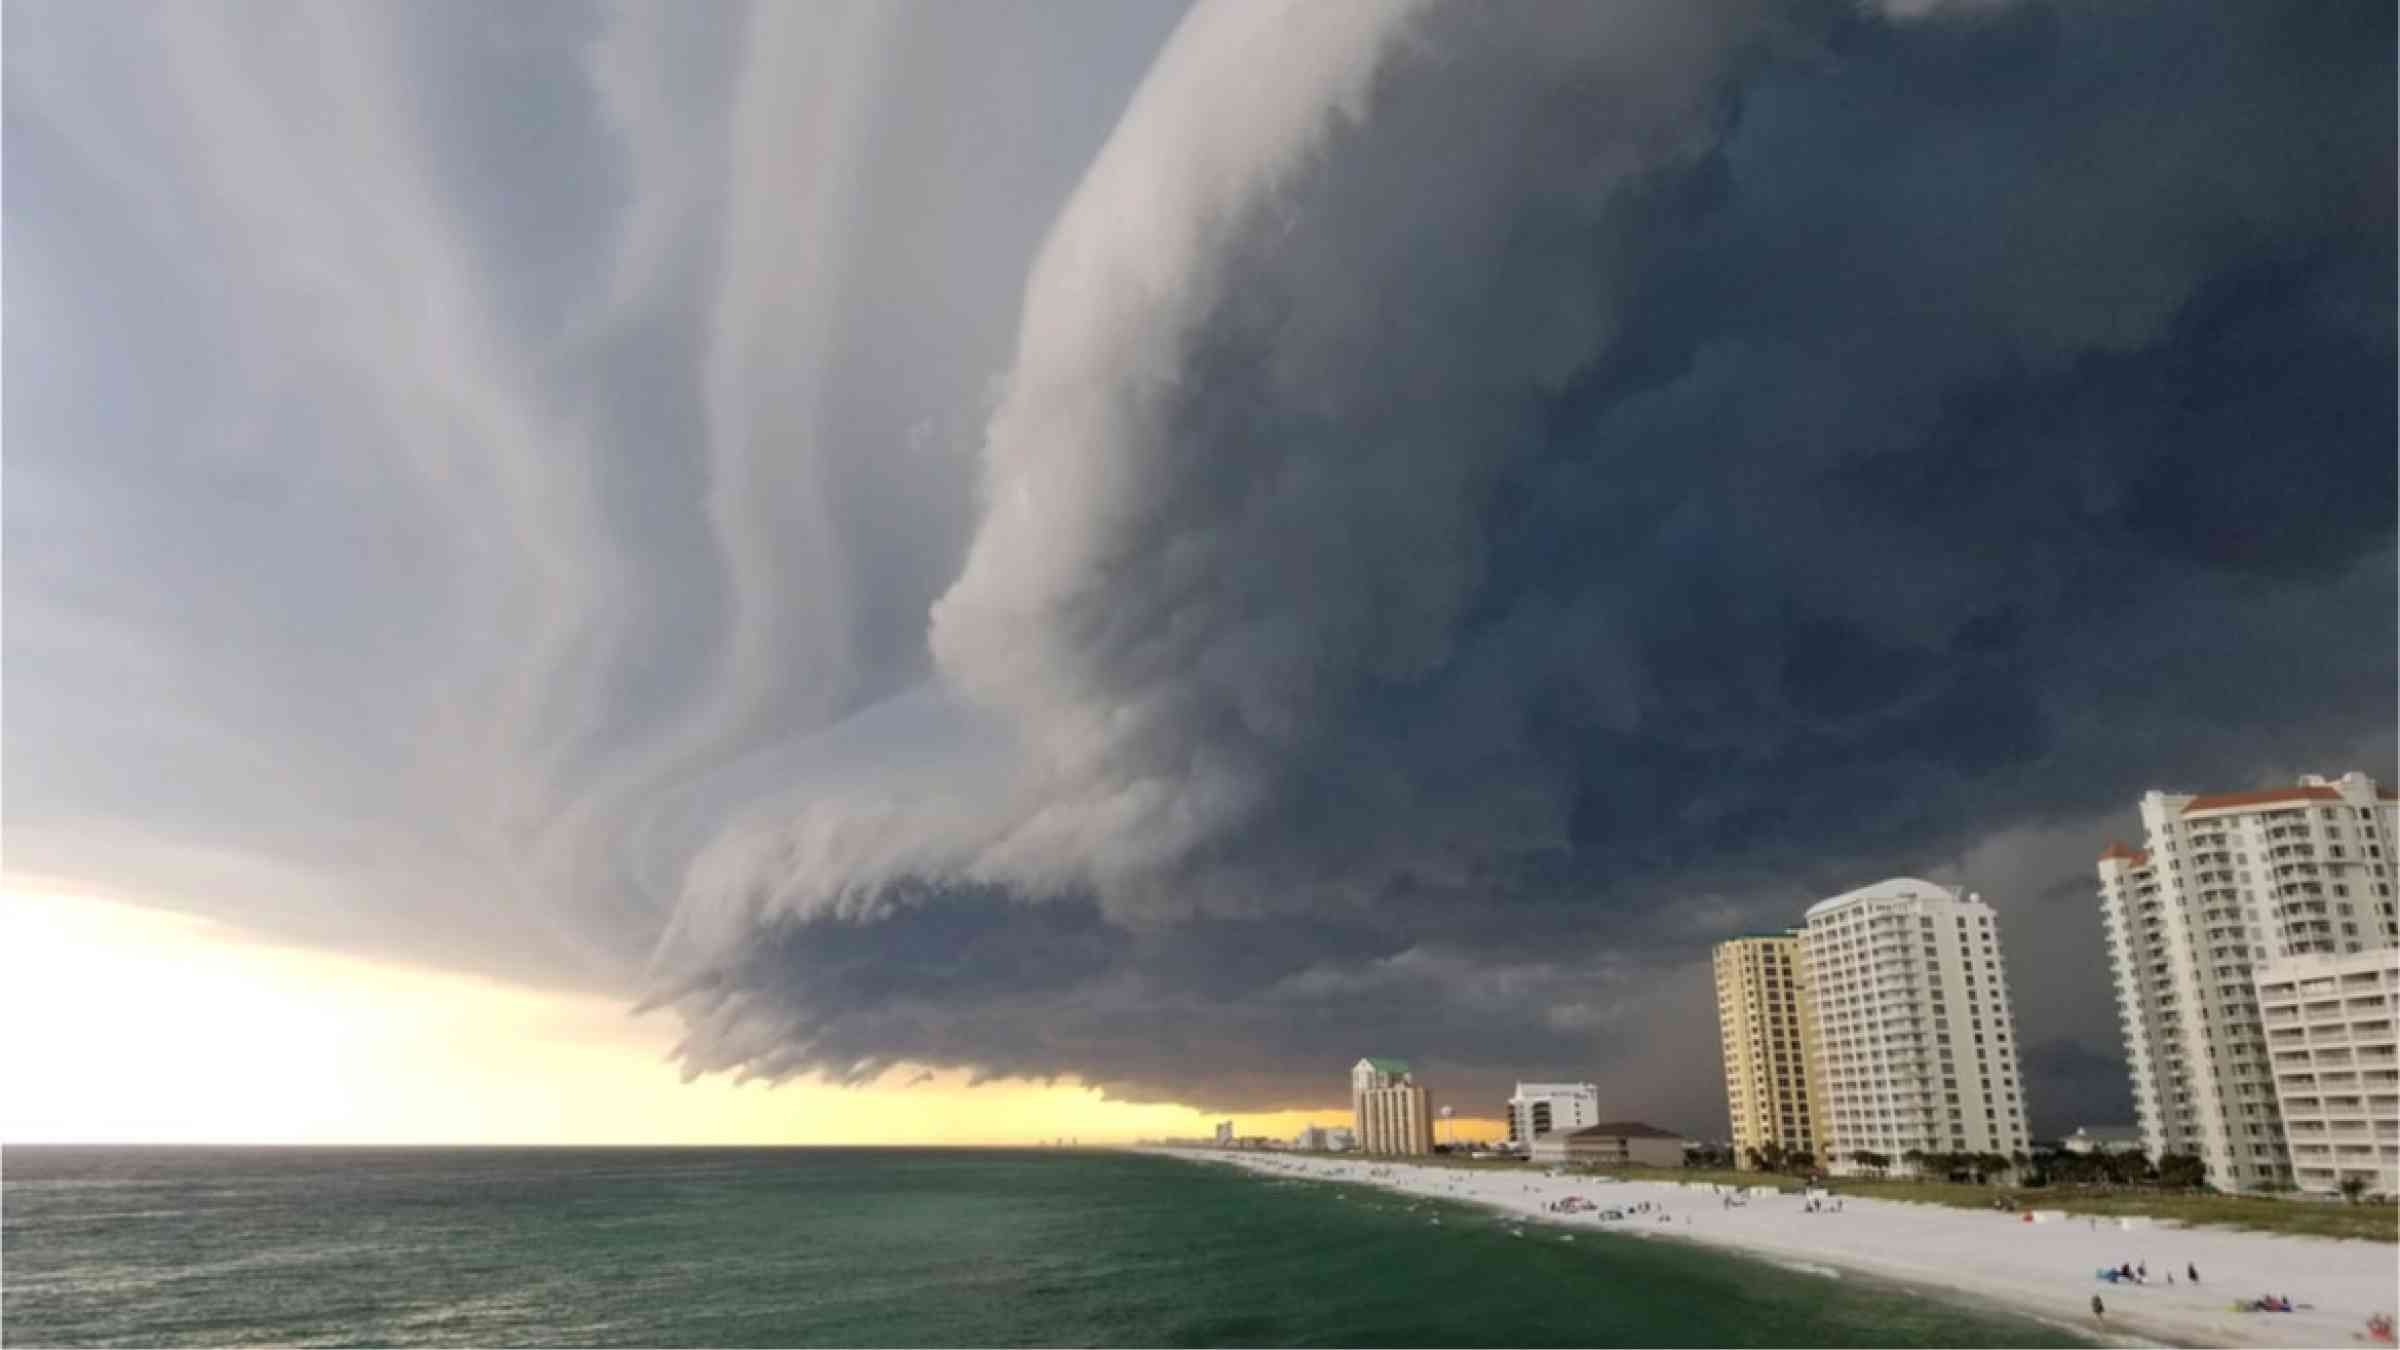 Storm cloud formation over the beach in Pensacola, Florida.